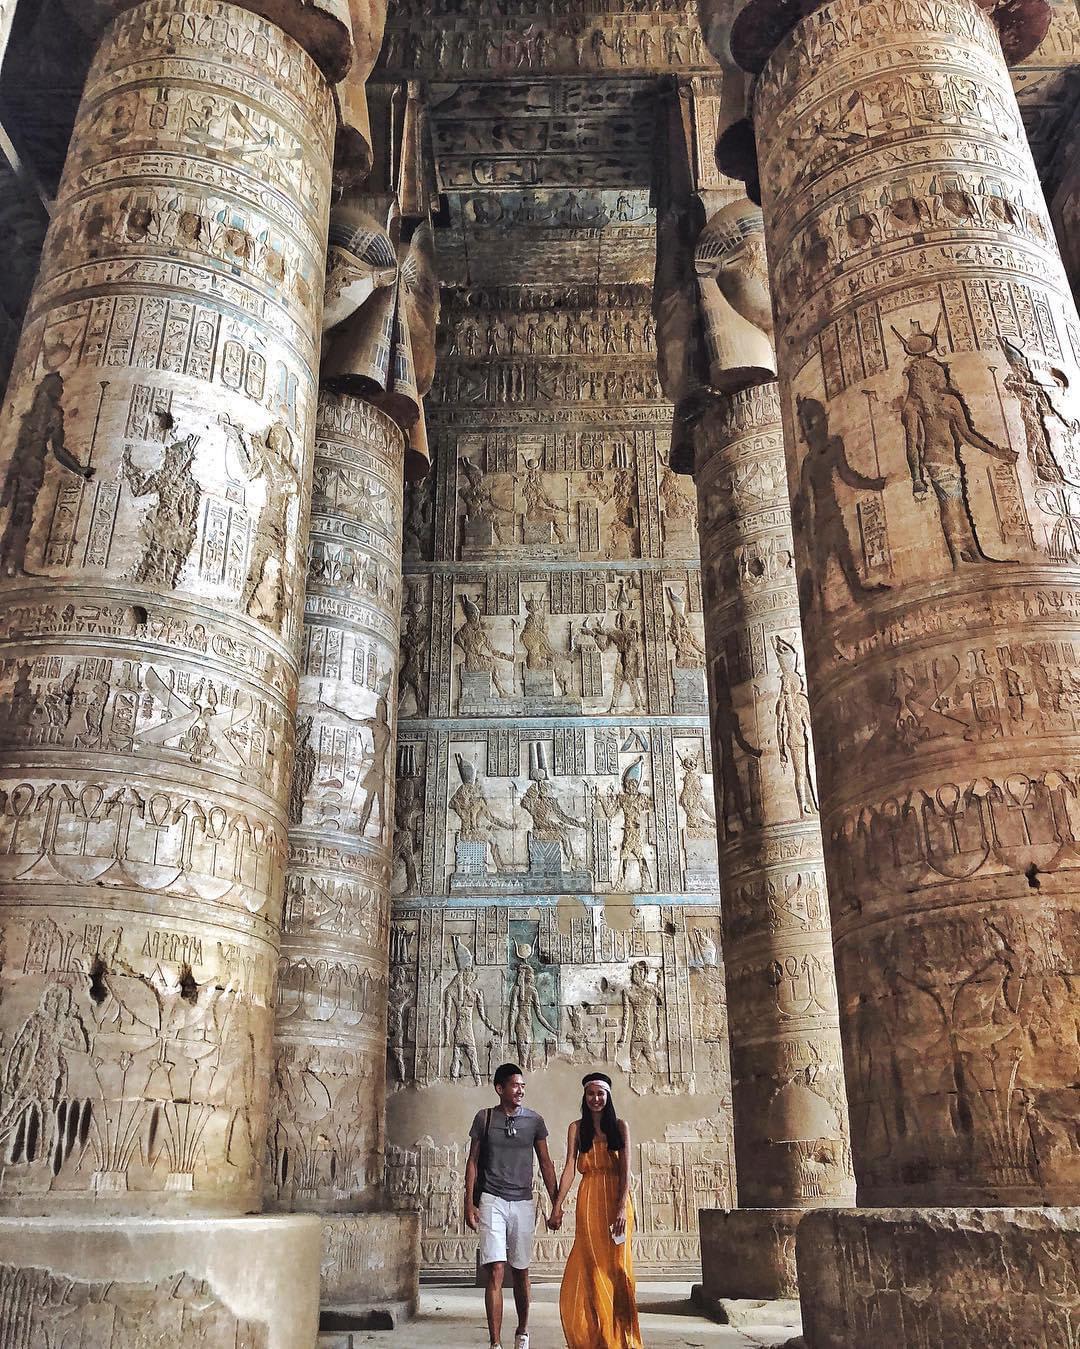 The temple of Goddess Hathor ( one of the most preserved temples with a lot of details)